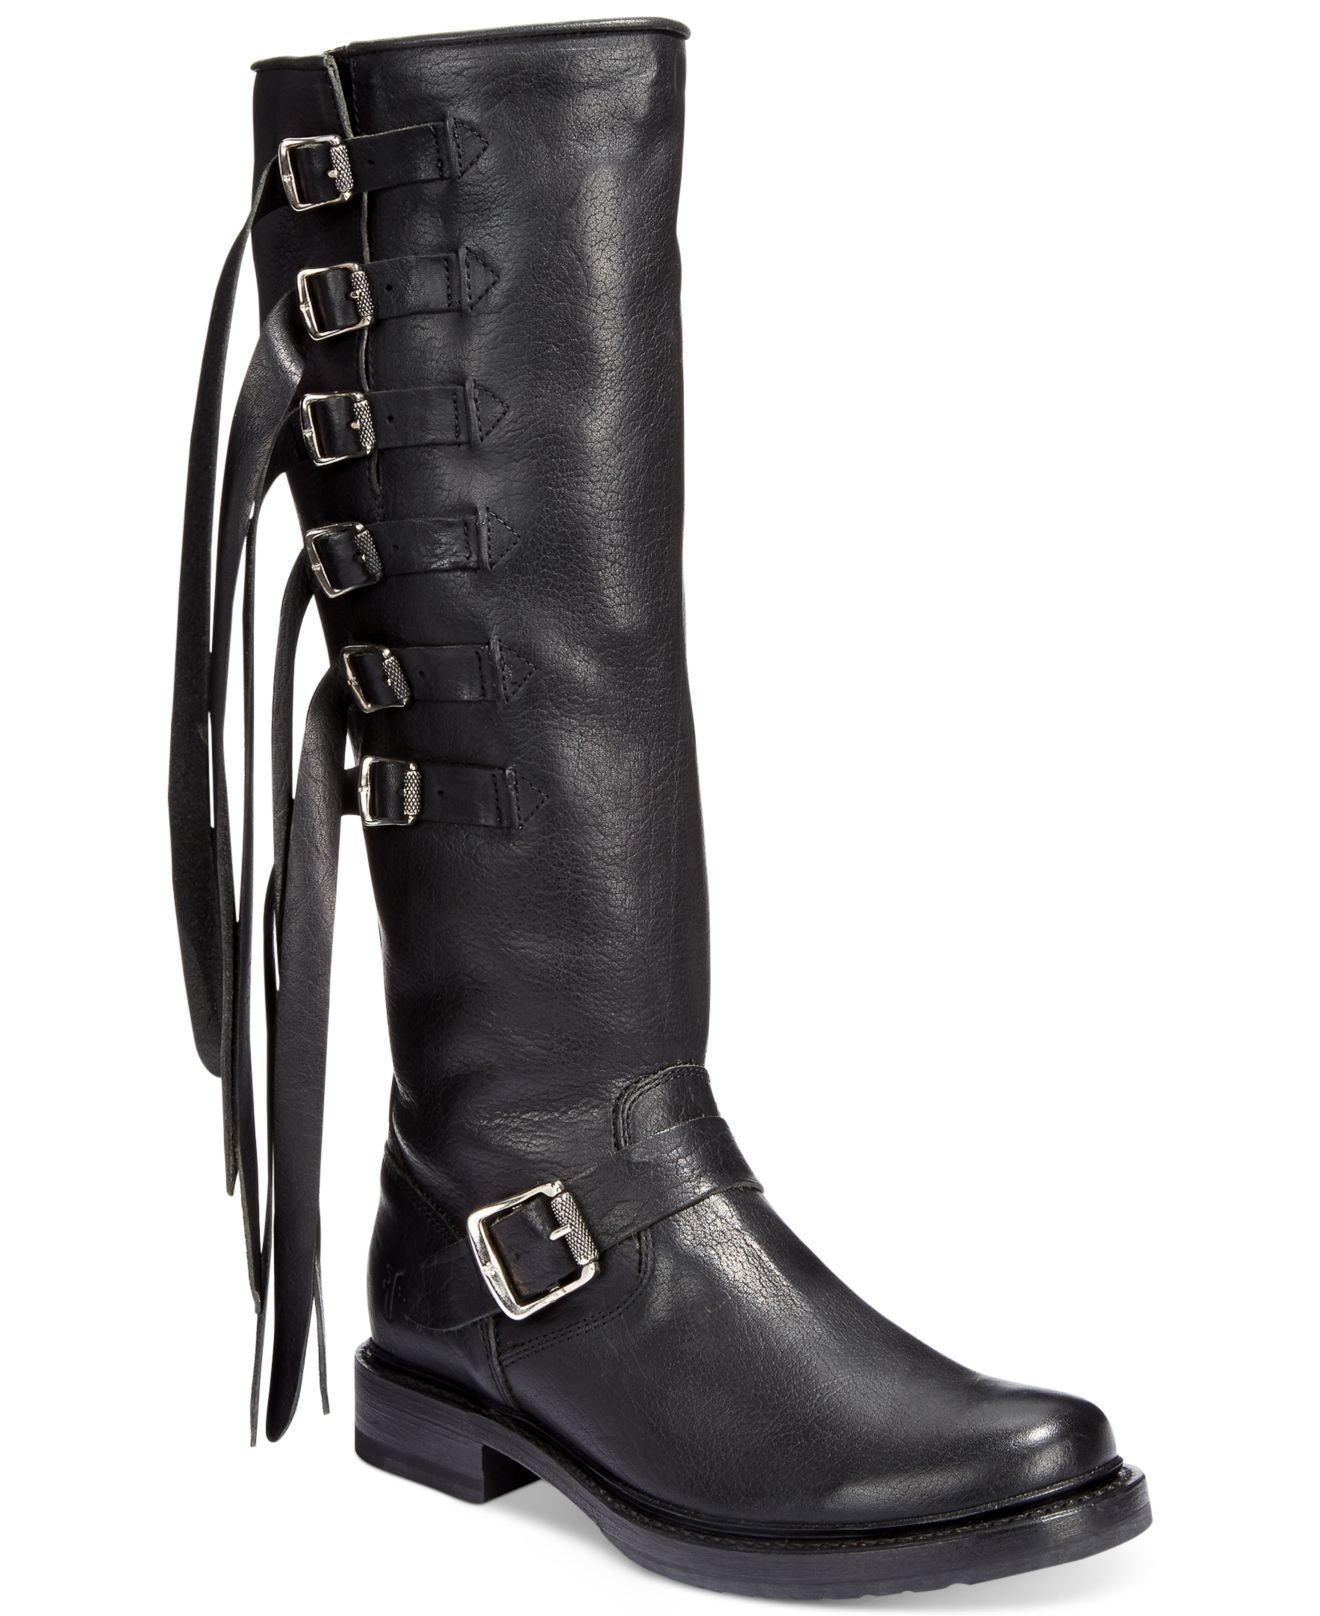 Frye Veronica Strap Tall Boots in Black - Lyst